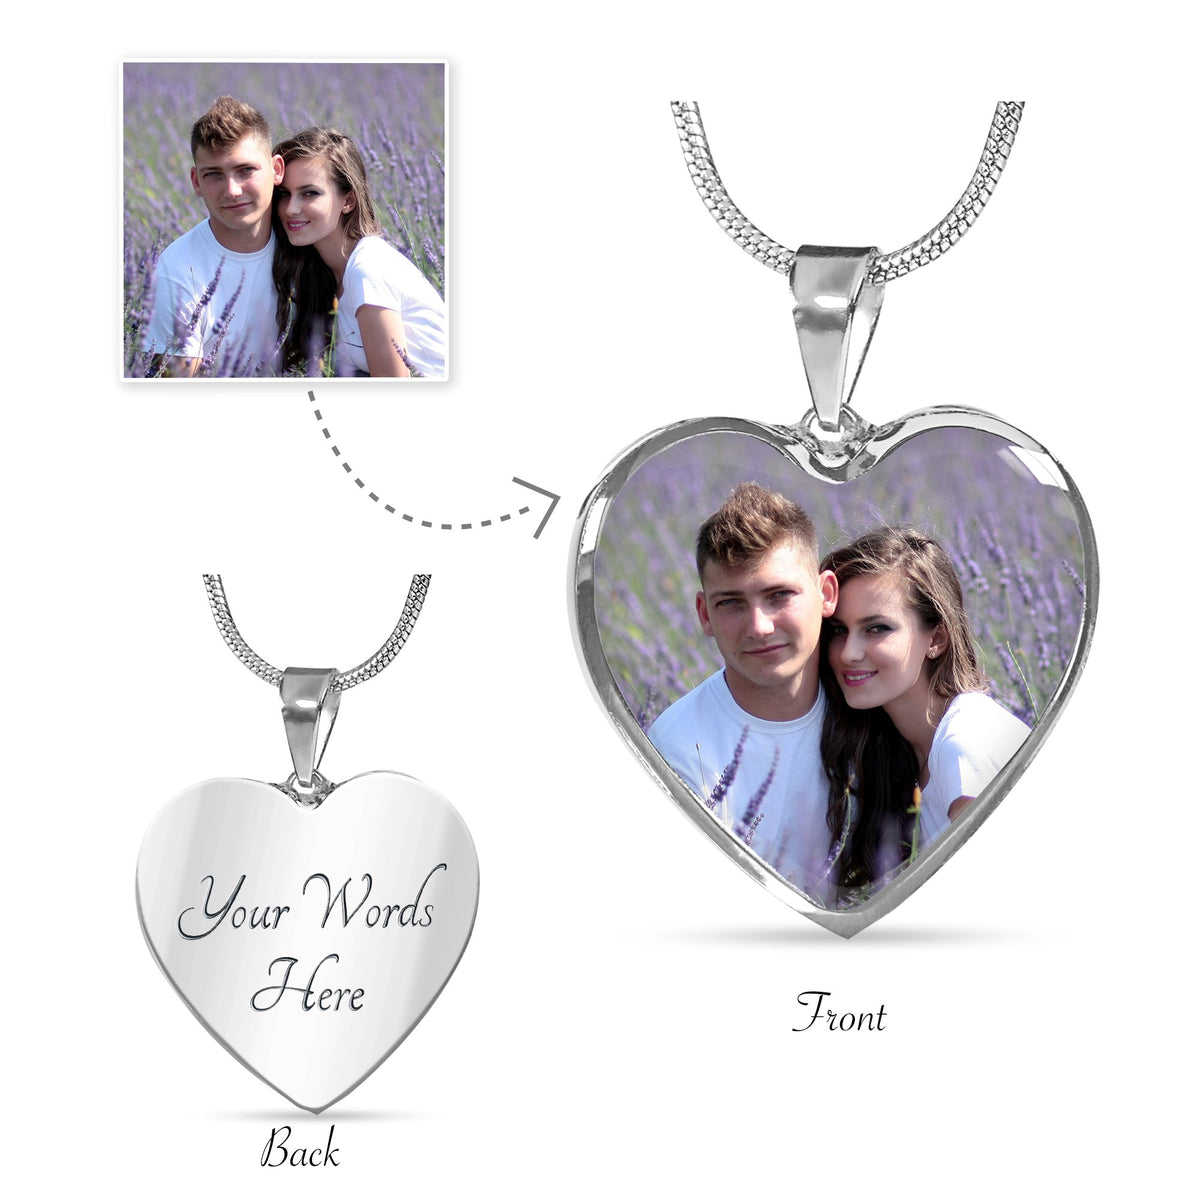 Personalized Photo Necklace Heart Shaped Jewelry ShineOn Fulfillment 